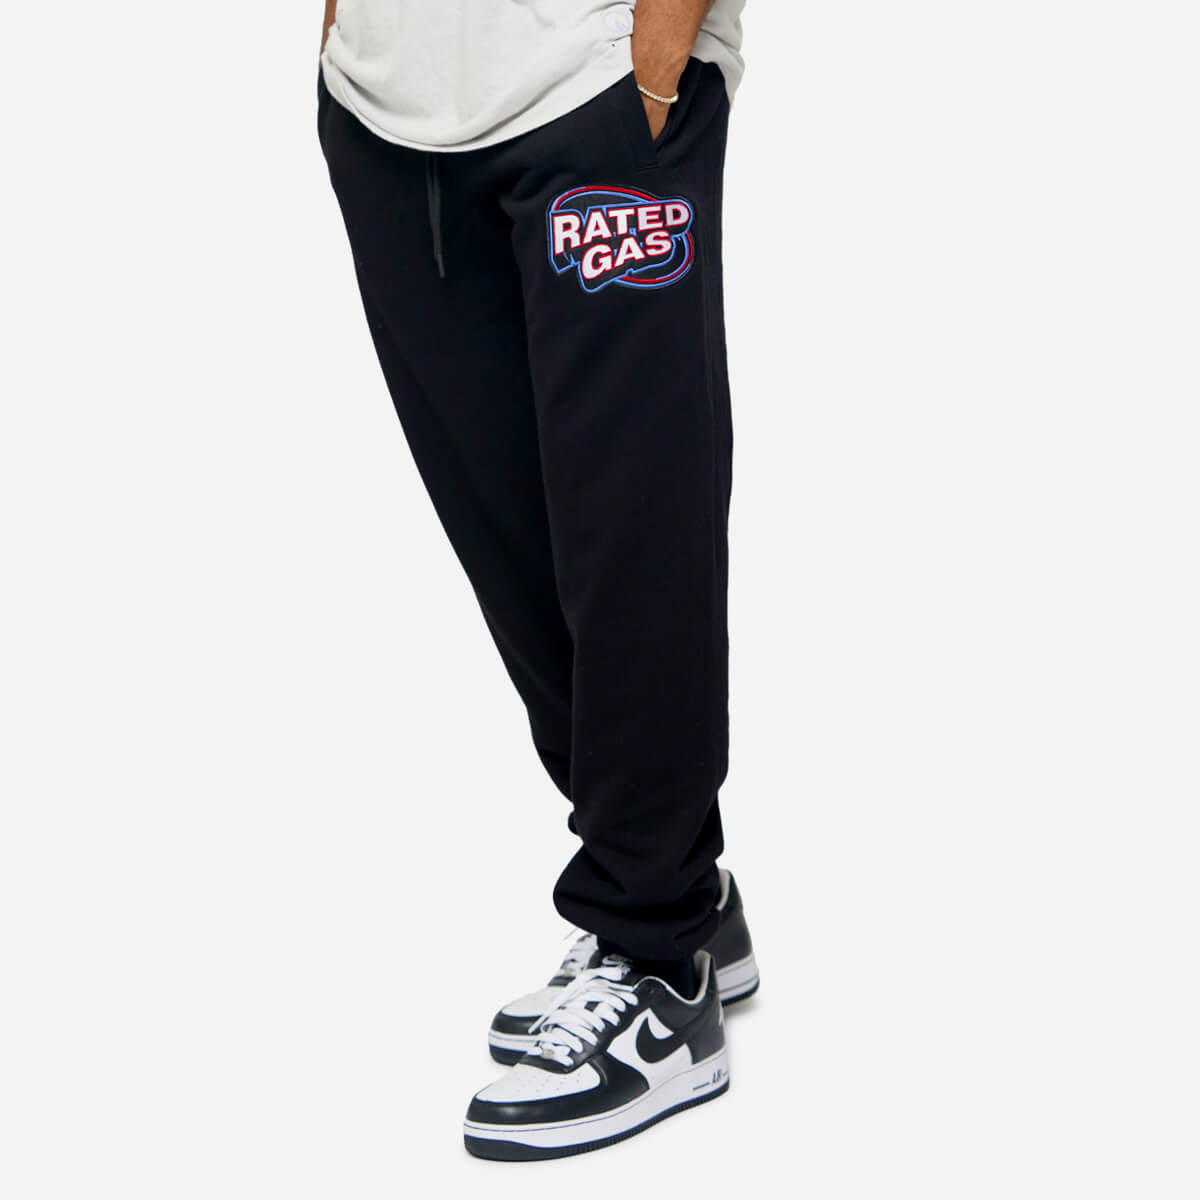 Rated Gas Sweatpants Black